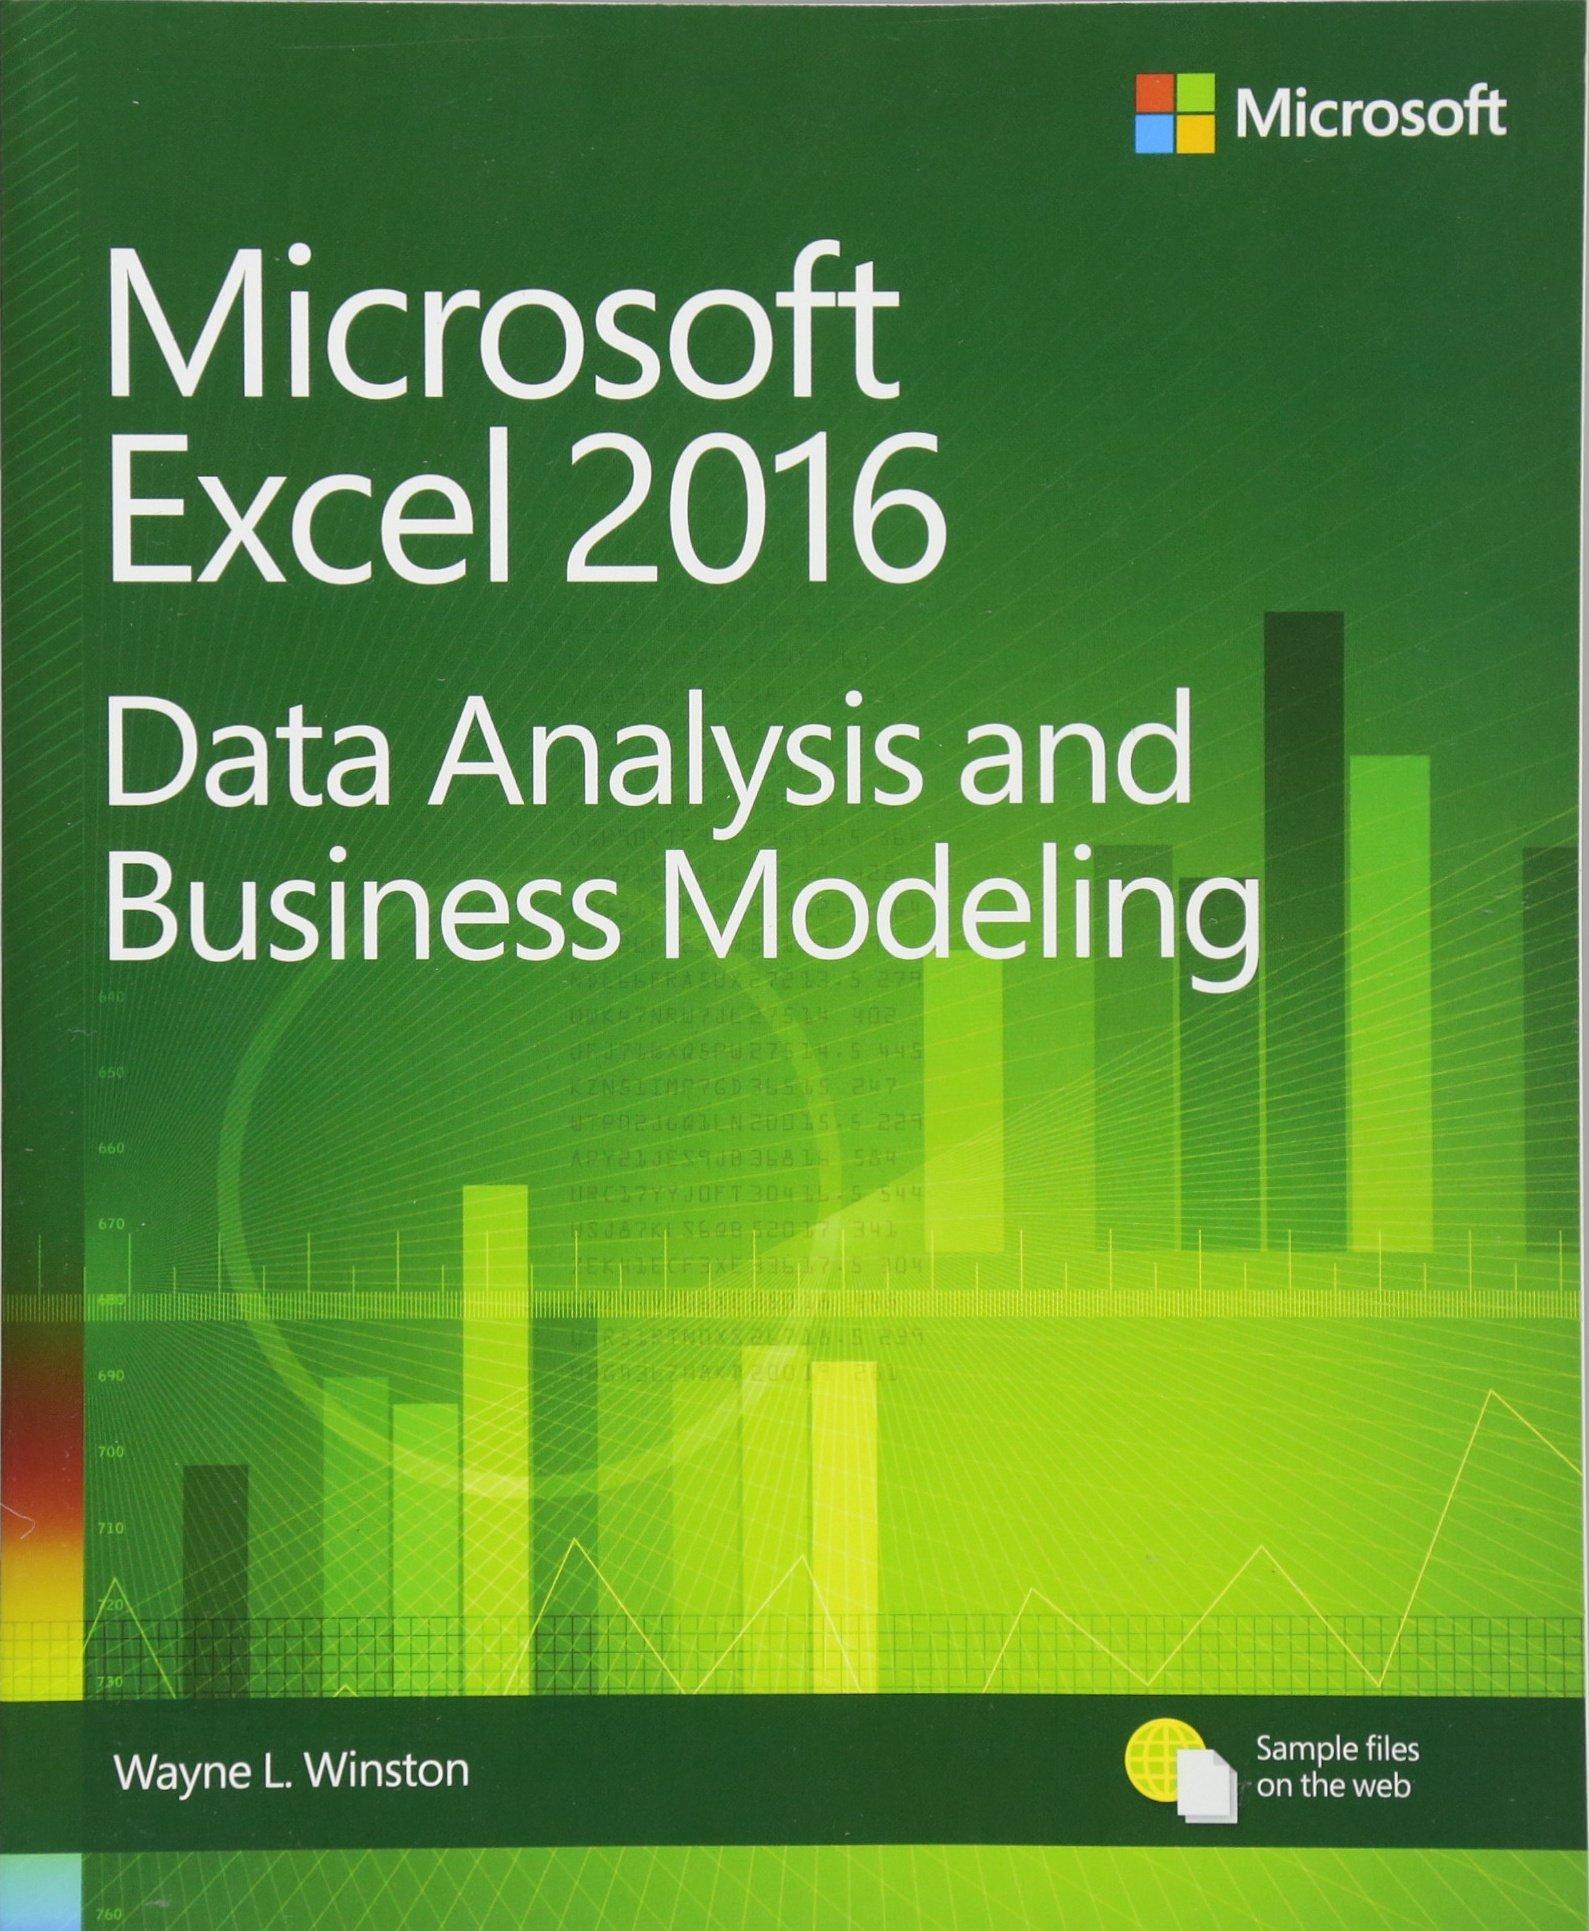 microsoft excel data analysis and business modeling 2016 5th edition wayne winston 8120353358, 9781509304219